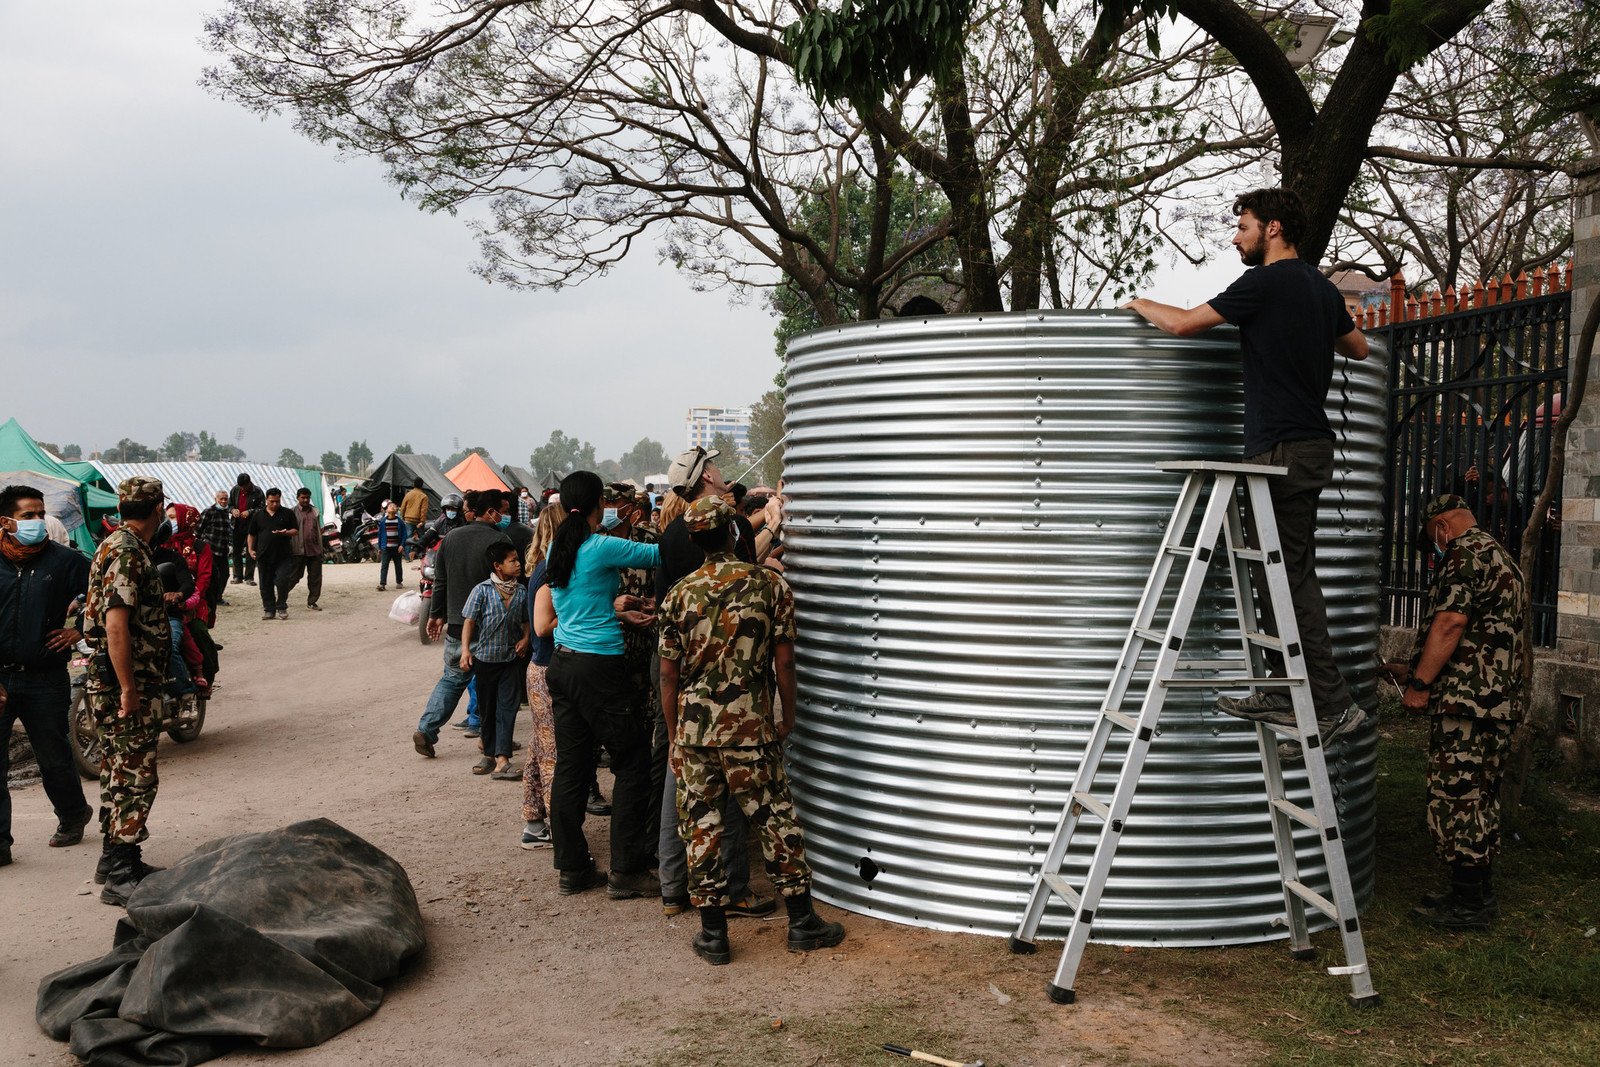 Oxfam has begun delivering aid to those affected by the earthquake by providing clean water, toilets and shelter. We have erected a water tank that can hold 11,000 litres of clean drinking water at the Tundikhel camp in Kathmandu. (Photo: Aubrey Wade / Oxfam)